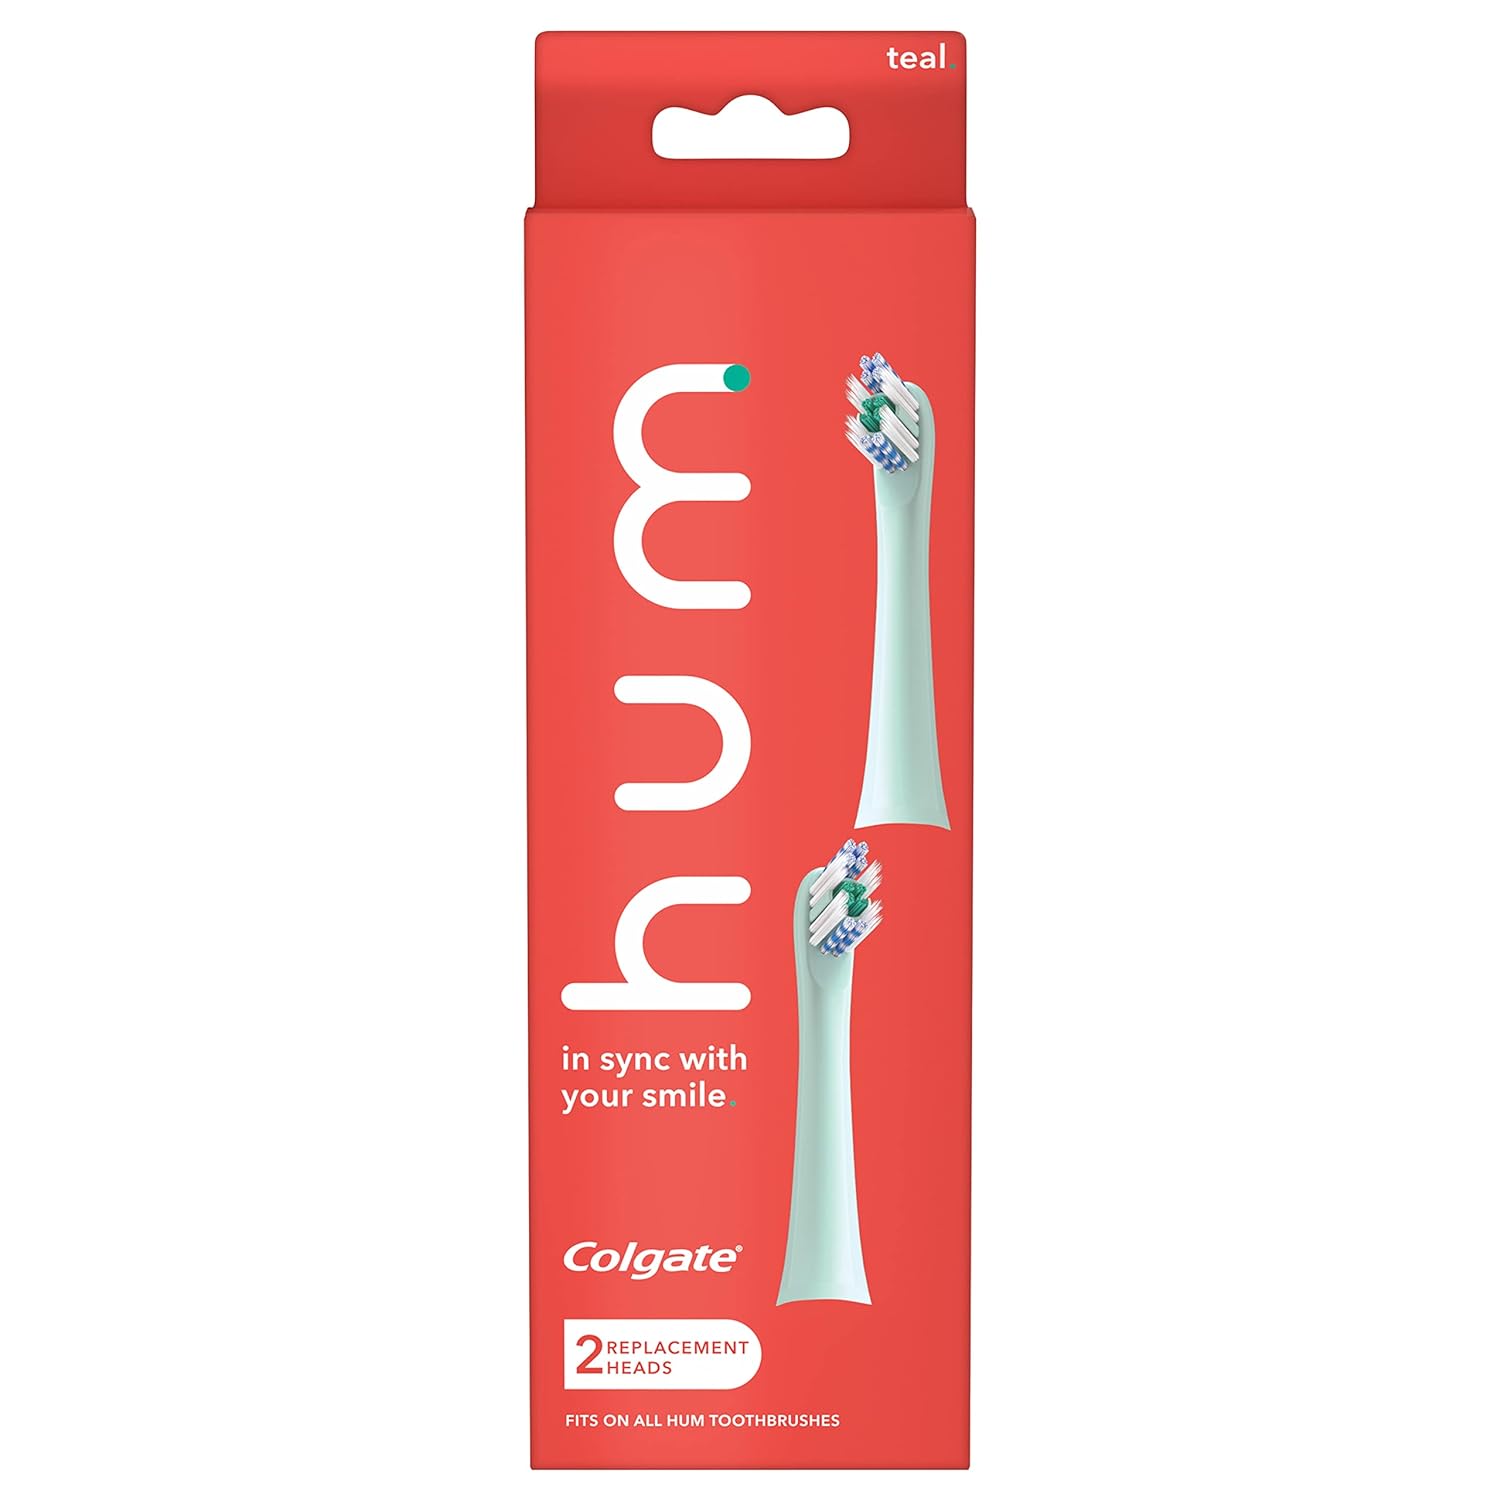 hum Replacement Heads, hum Toothbrush Heads with Floss Tip Bristles for Smart Toothbrush, Teal, 2 Pack